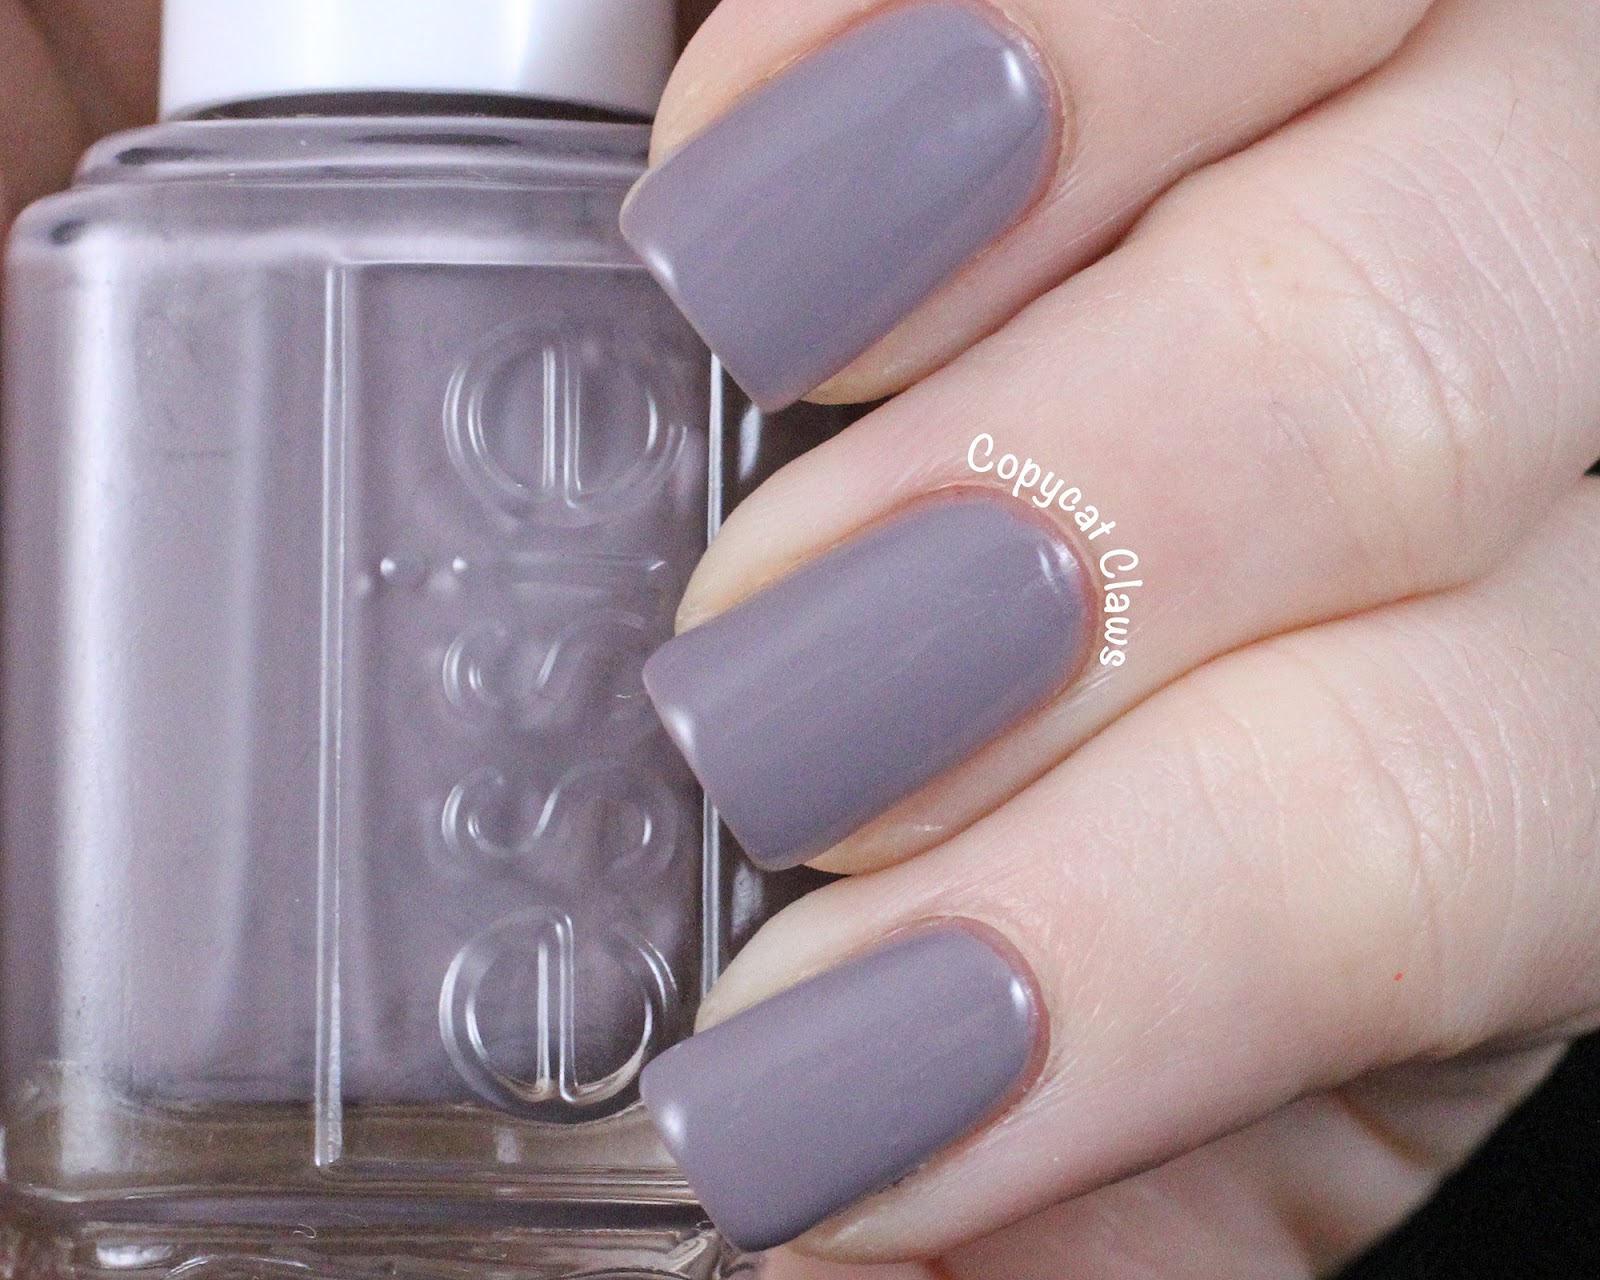 Essie Nail Polish in "Chinchilly" - wide 1